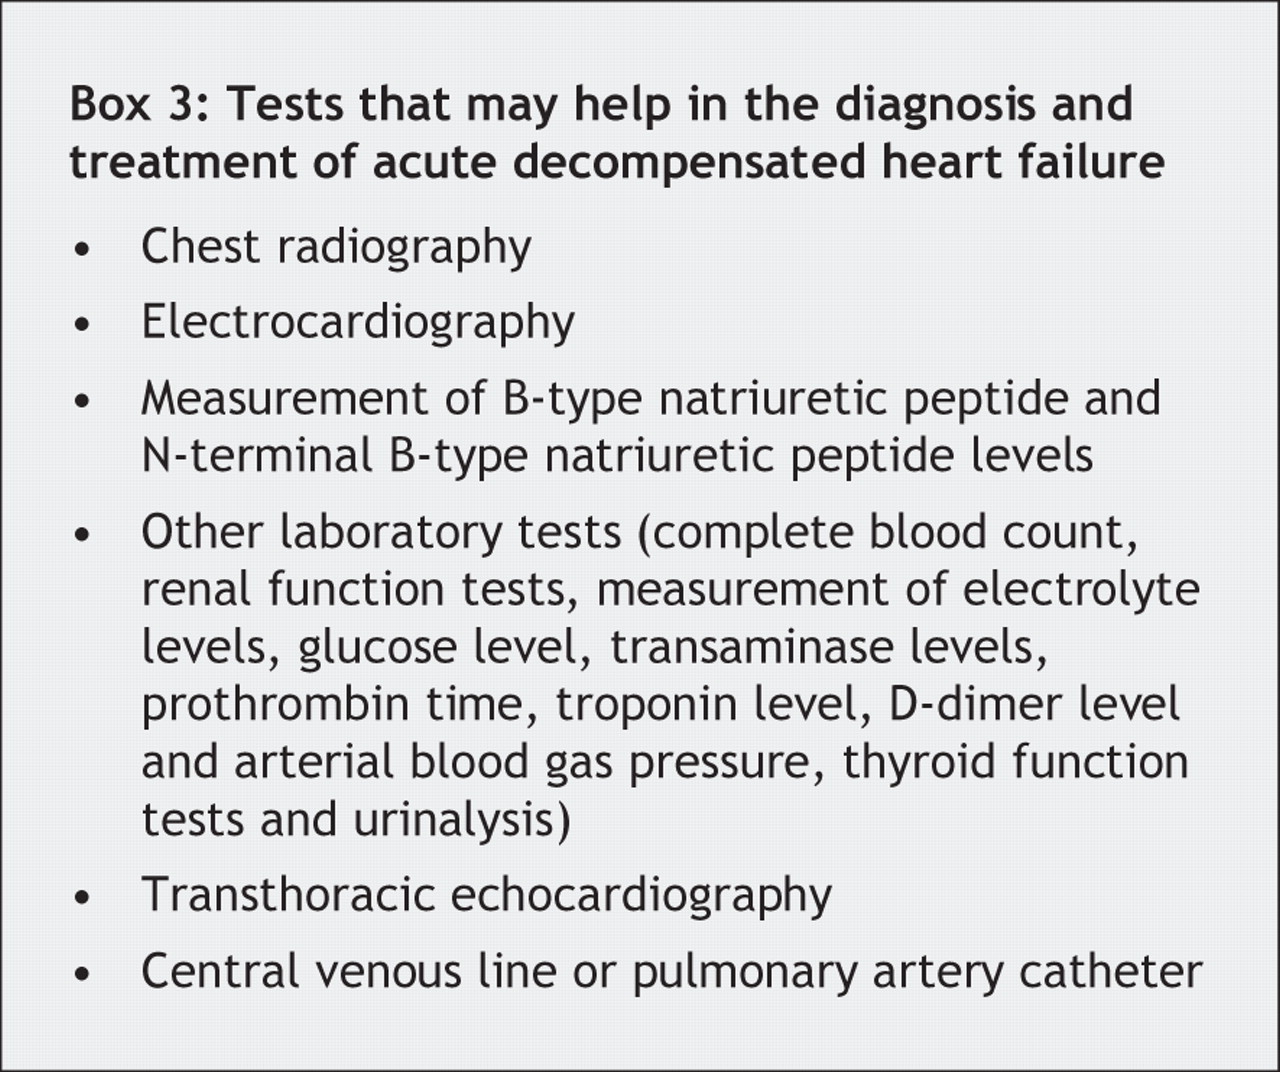 Management of acute decompensated heart failure